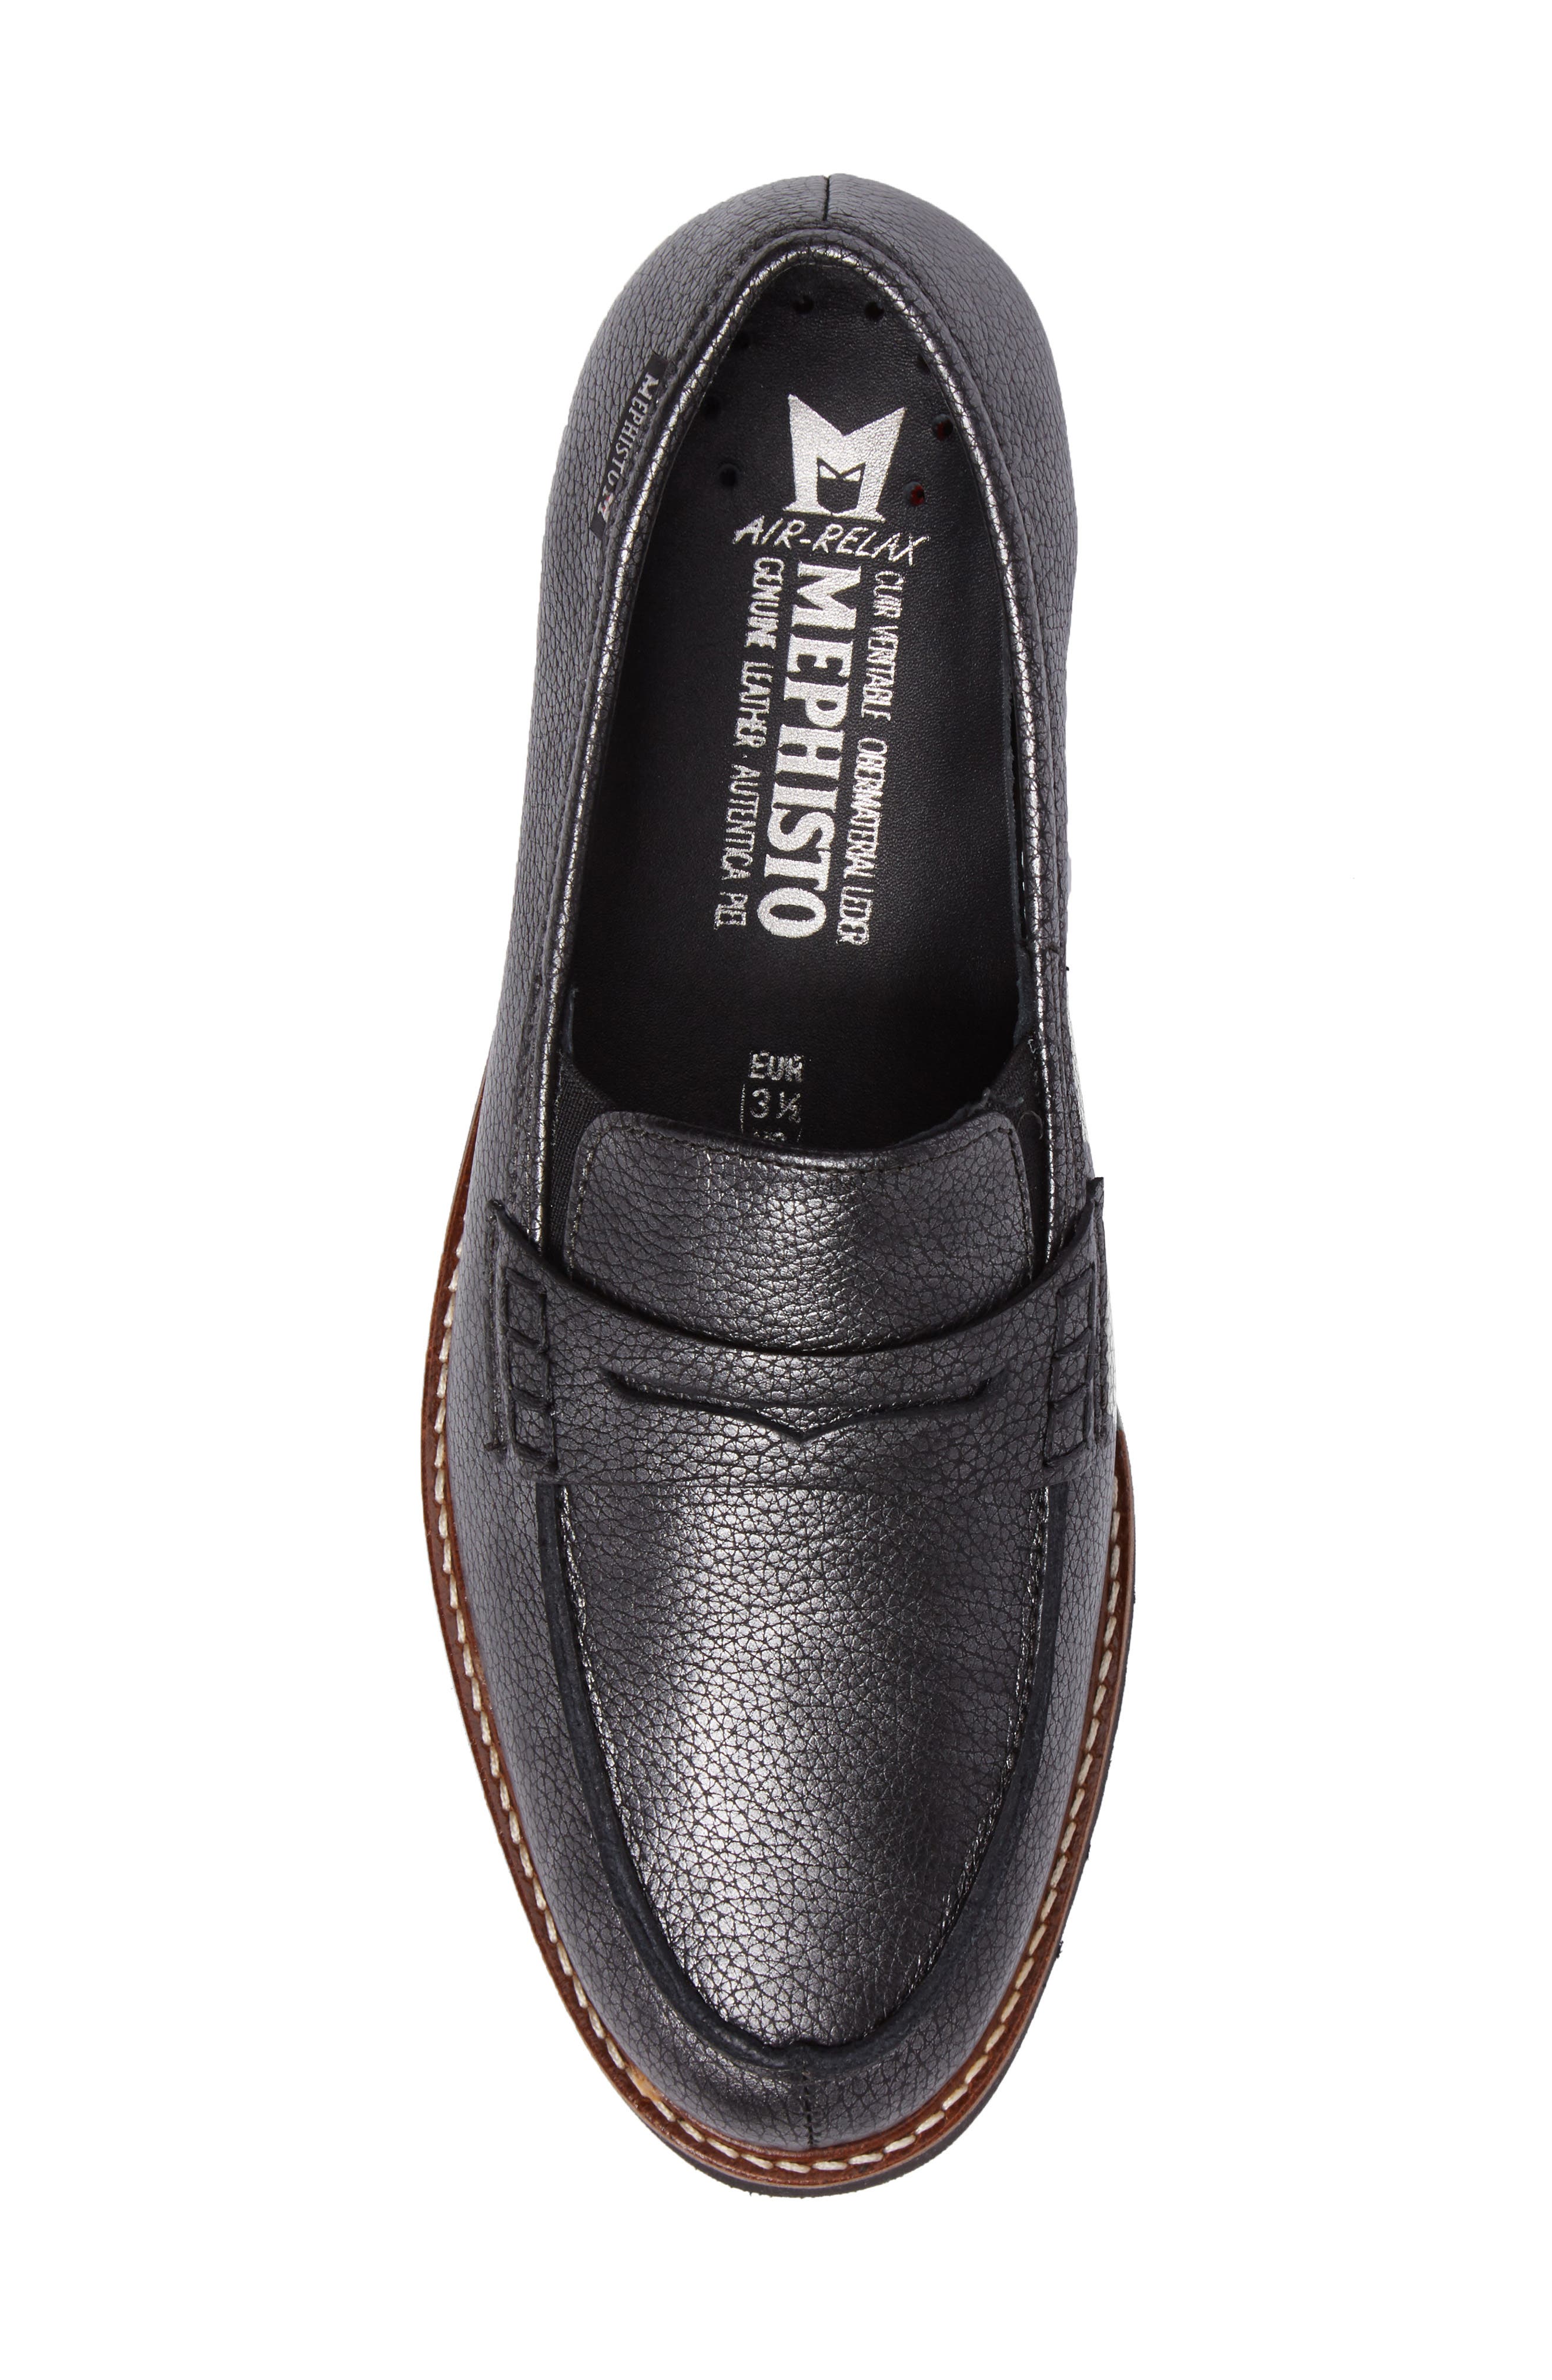 mephisto penny loafer